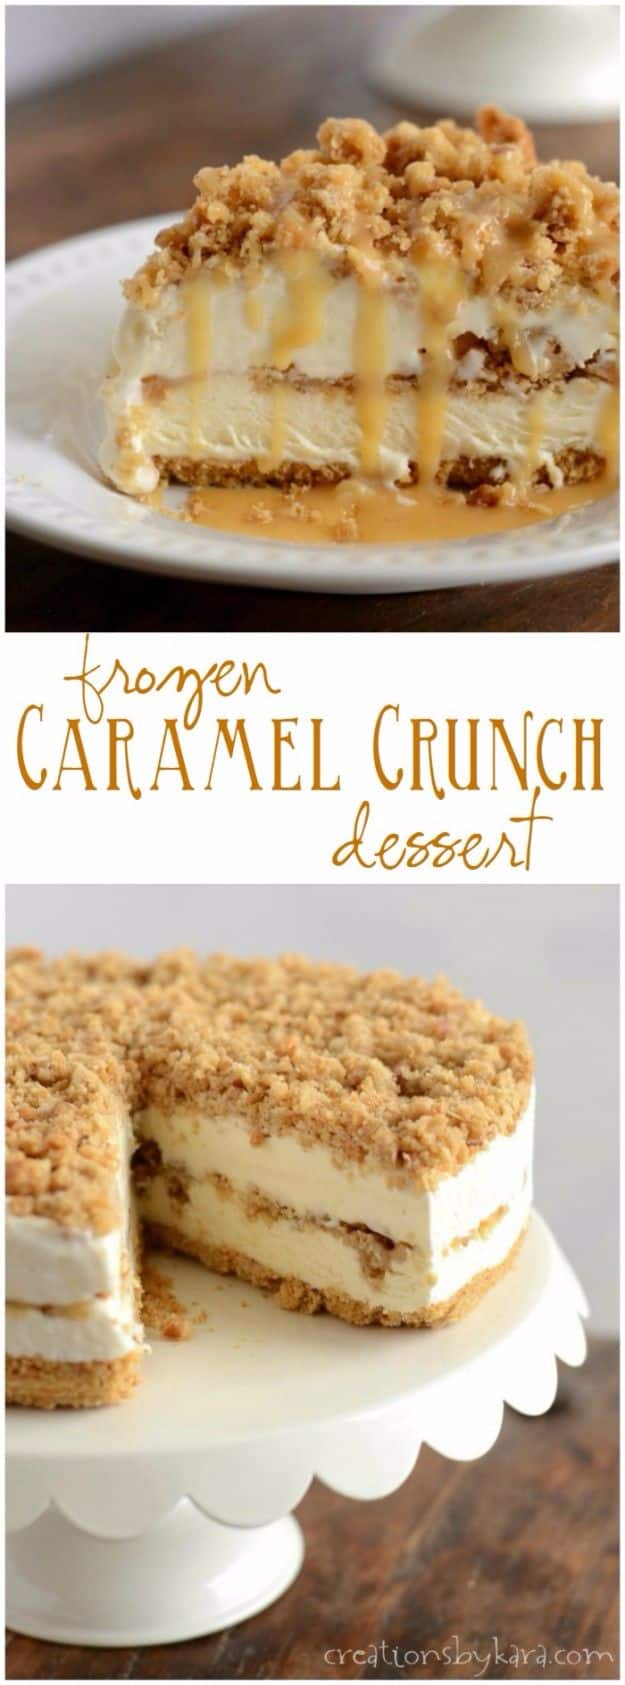 Best Recipe Ideas for Summer - Frozen Caramel Crunch Torte - Cool Salads, Easy Side Dishes, Recipes for Summer Foods and Dinner to Beat the Heat - Light and Healthy Ideas for Hot Summer Nights, Pool Parties and Picnics http://diyjoy.com/best-recipes-summer